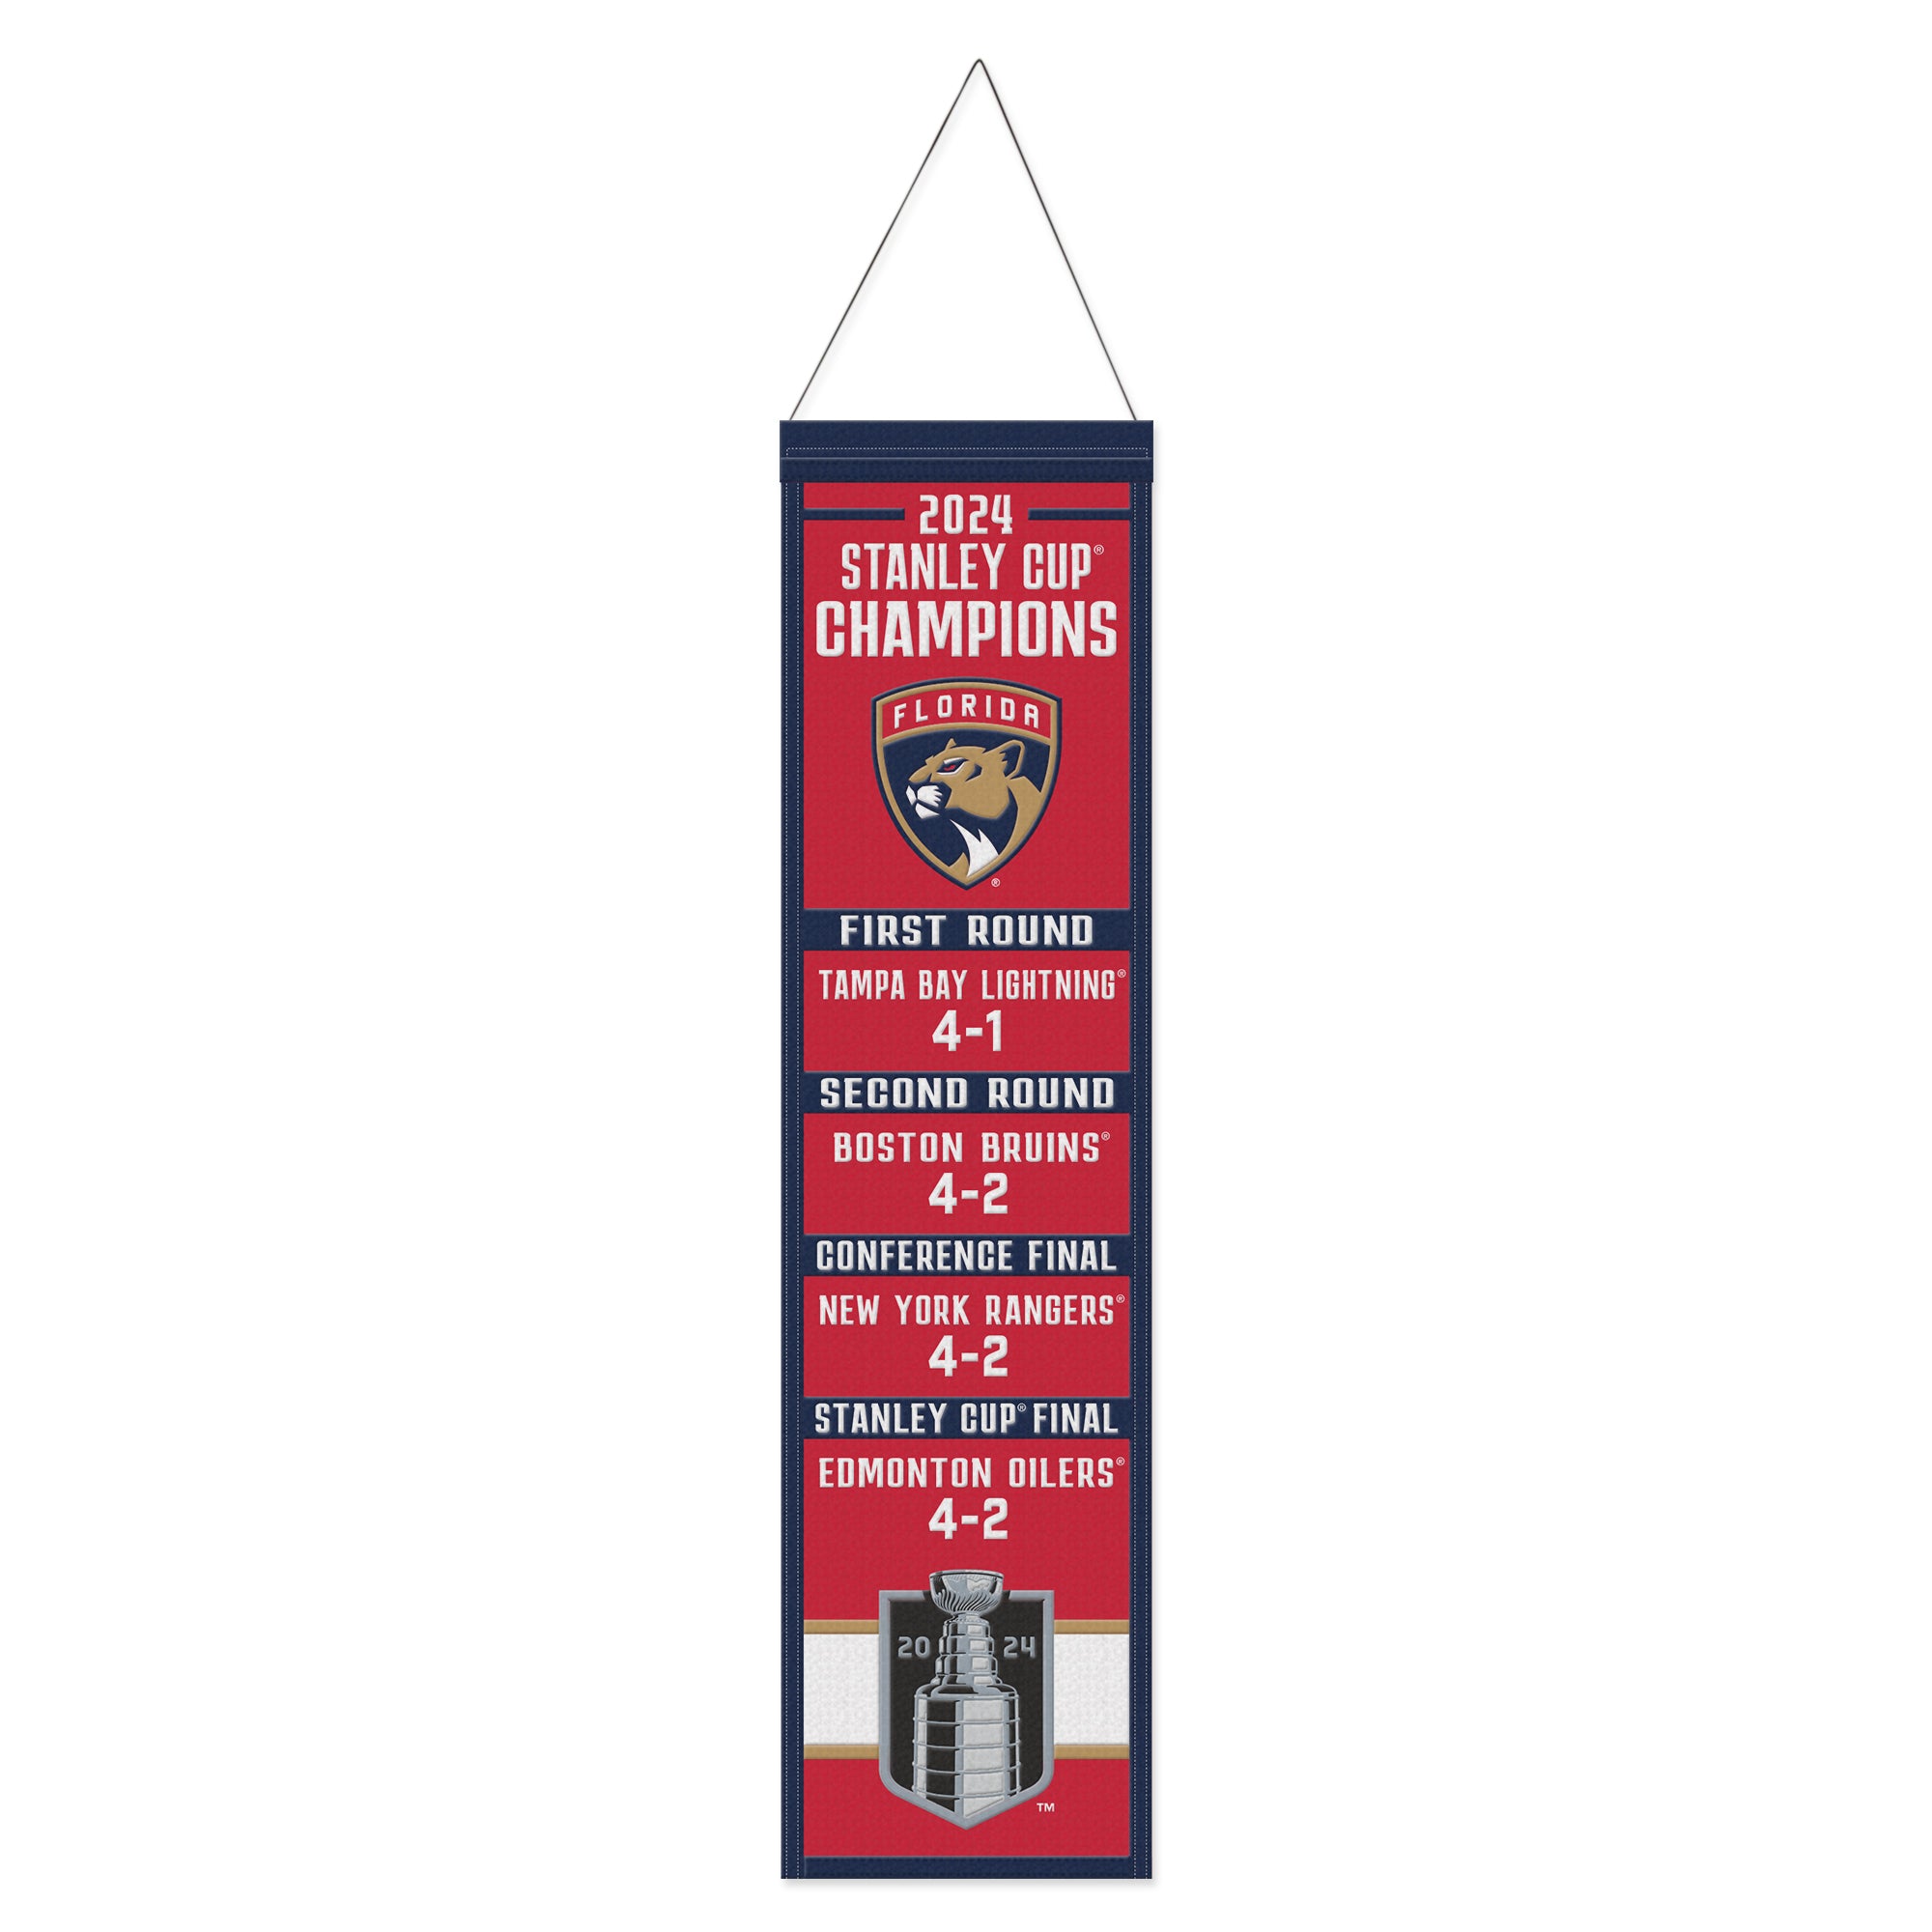 Florida Panthers 2024 Stanley Cup Champions Wool Banner - 8 x 32"